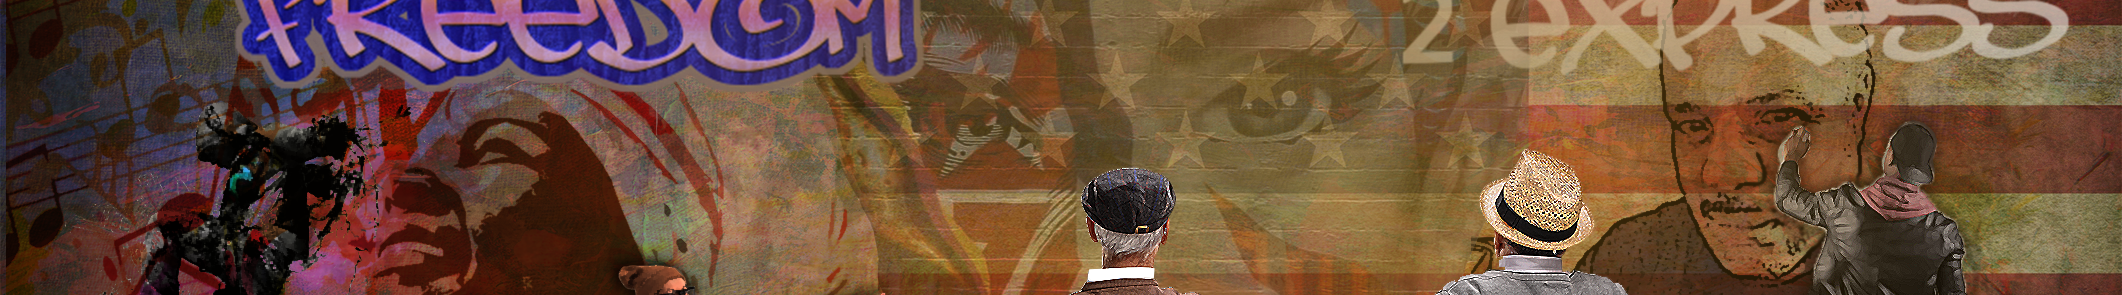 George Hopson's profile banner